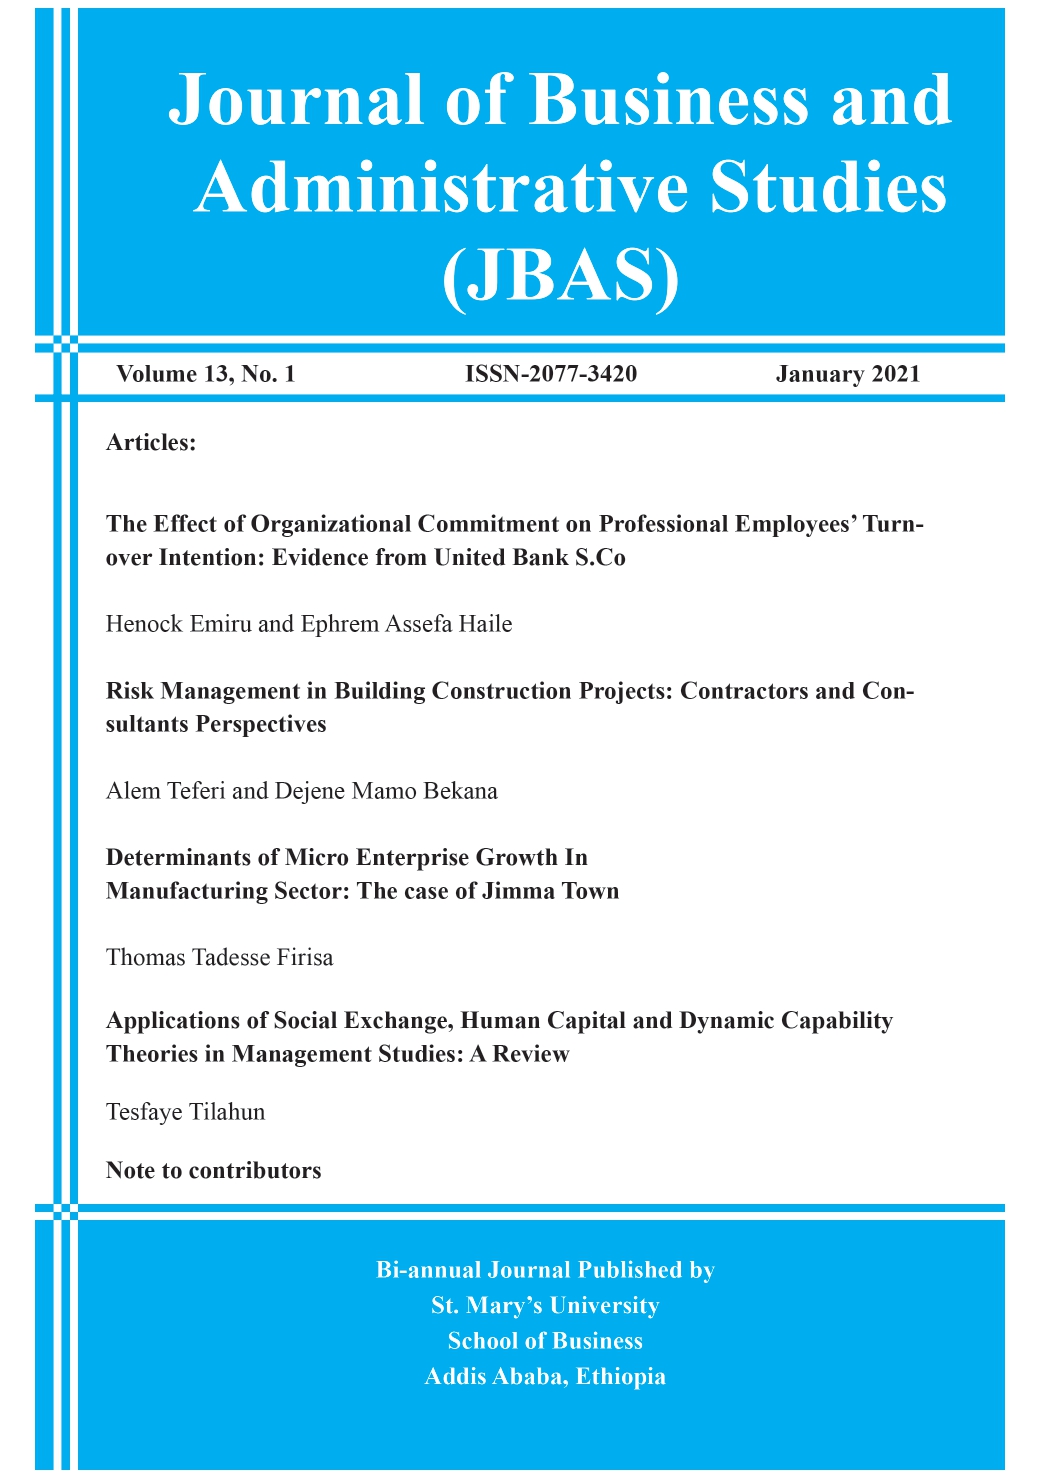 Journal of Business and Administrative Studies